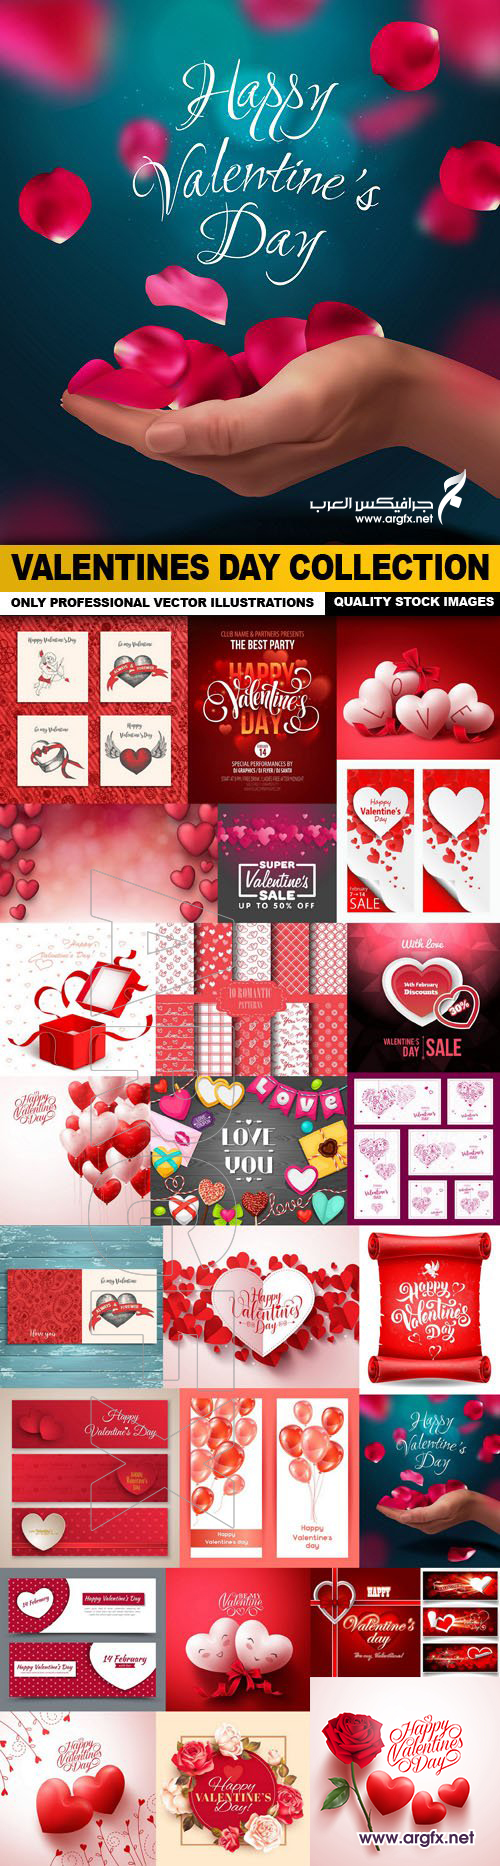  Valentines Day Collection - 25 Vector